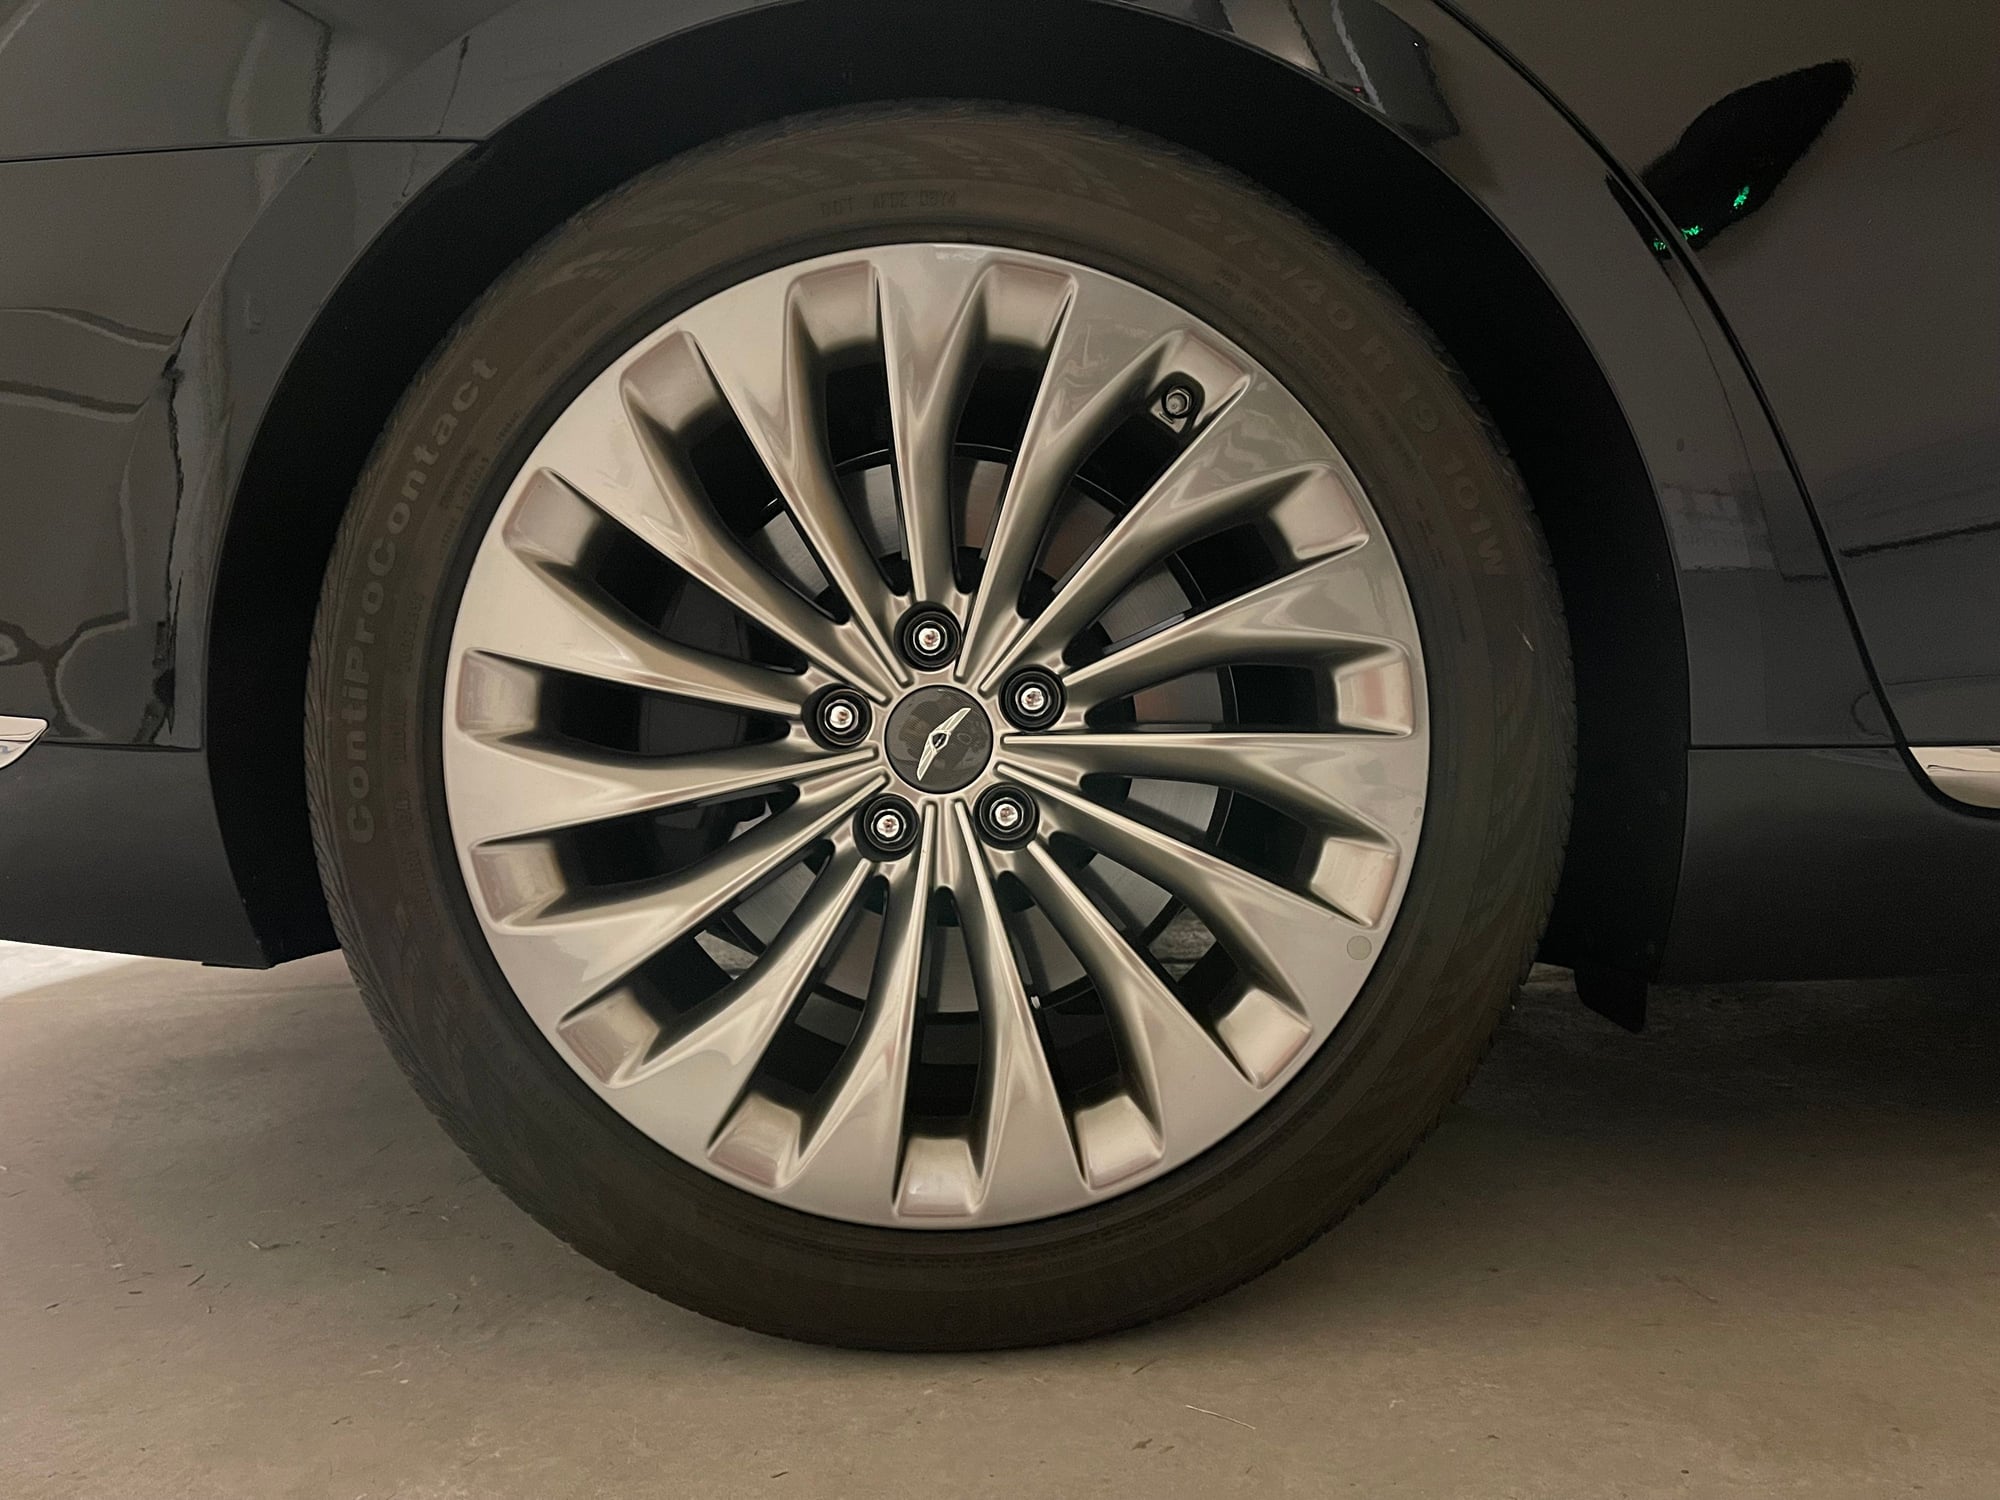 Wheels and Tires/Axles - Set of 19" Continental ProContact Tires - Used - 2014 to 2020 Mercedes-Benz S-Class - 2006 to 2022 BMW 7-Series - Orange County, CA 92832, United States